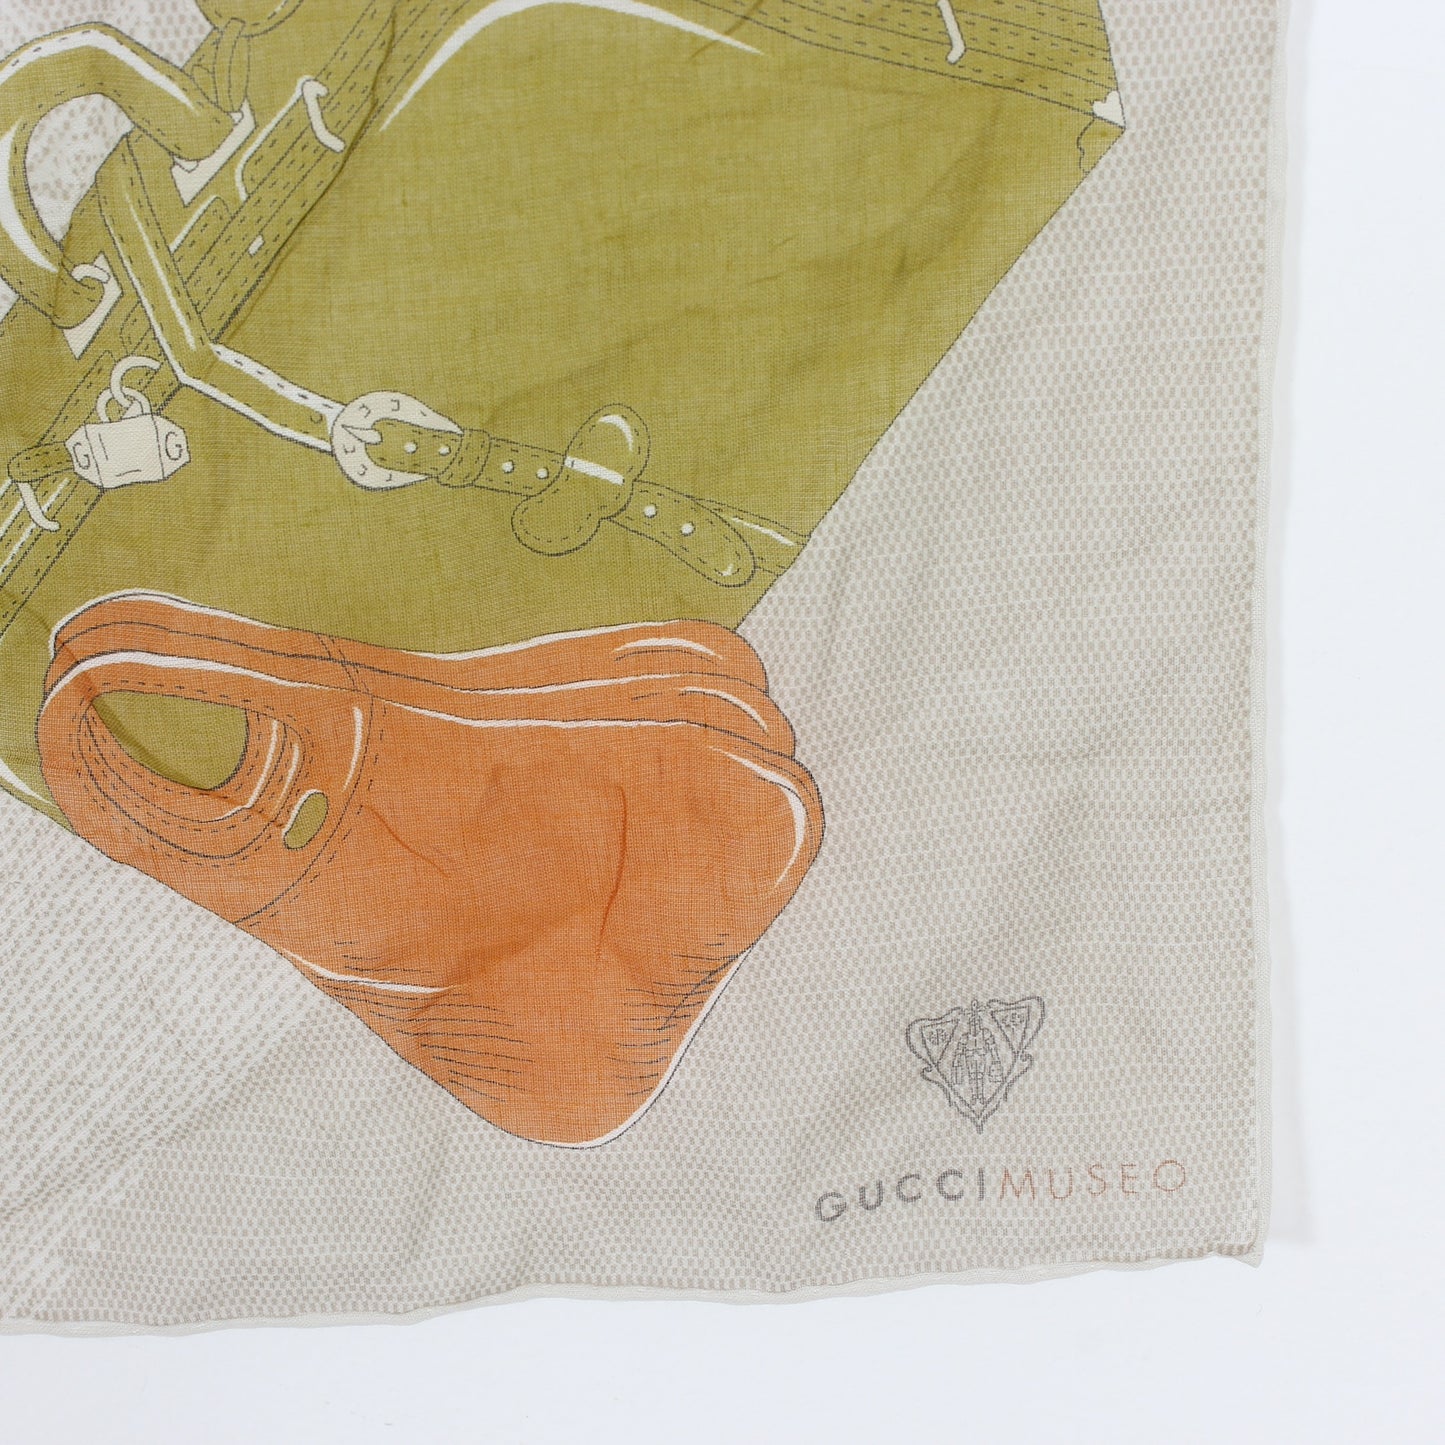 Gucci Museo Cotton Beige Scarf 2011s Limited Edition